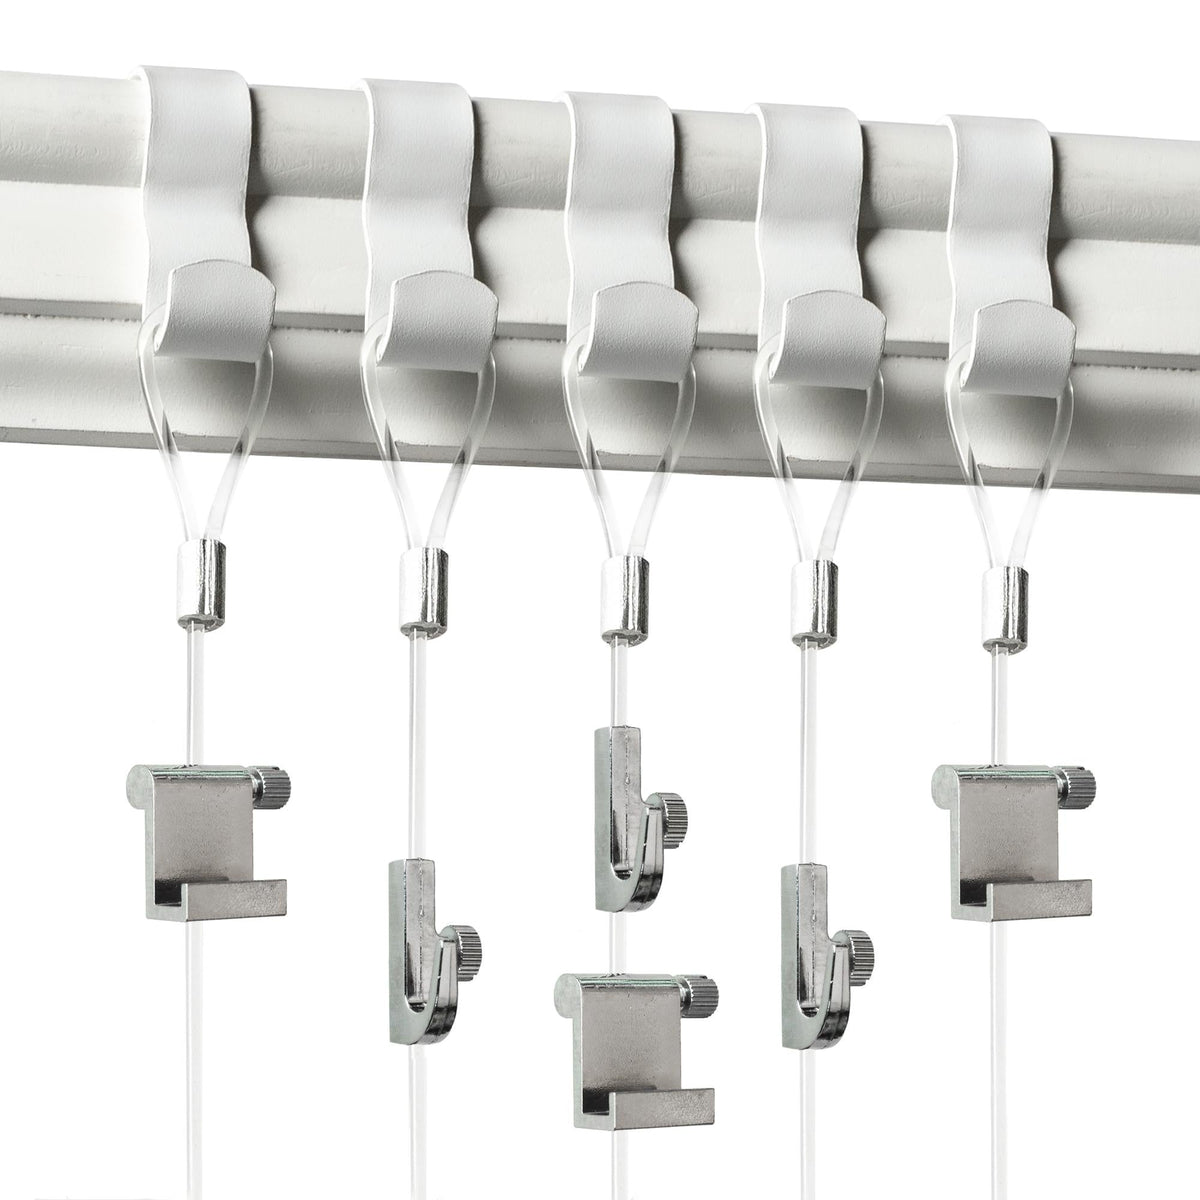 Gallery Kit with White Picture Rail Hooks